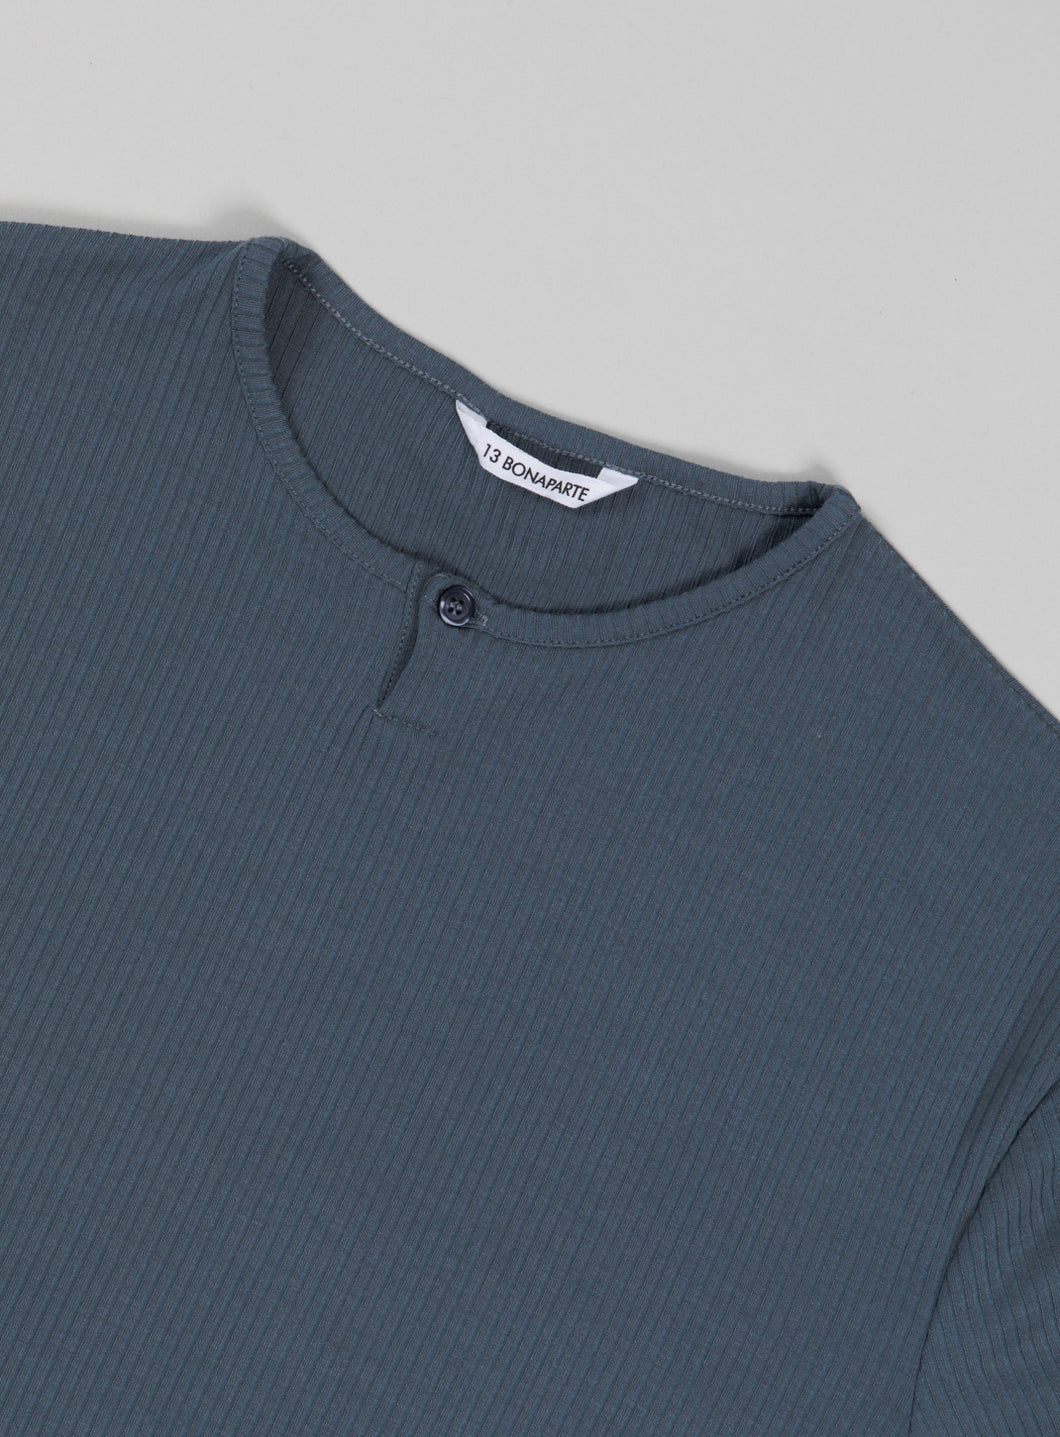 1 Button T-Shirt in Lead Grey Ribbed Jersey